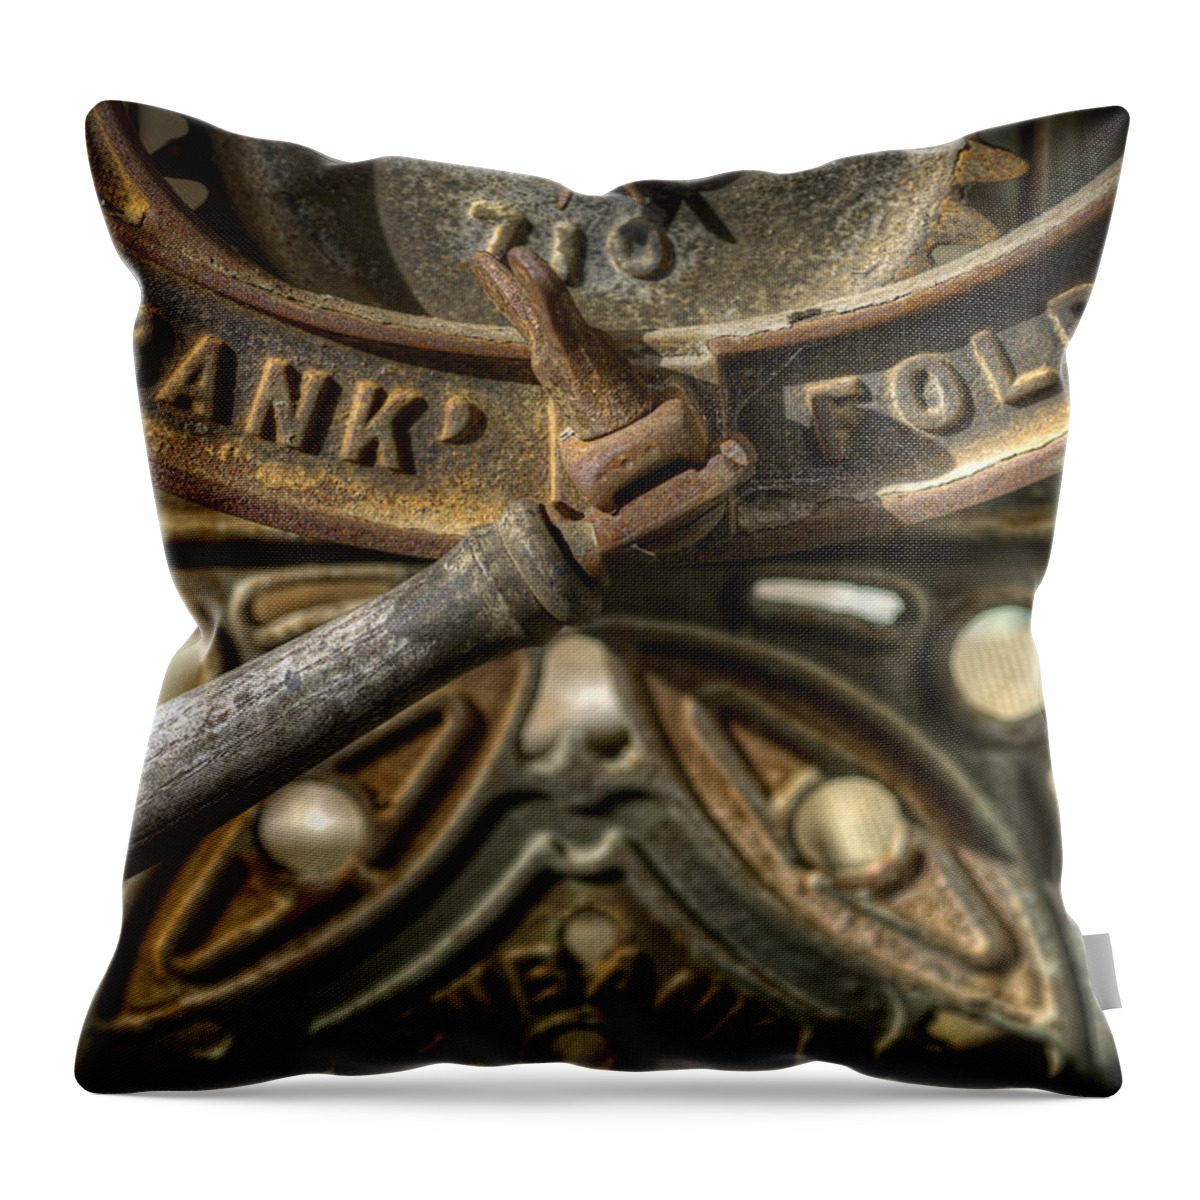 Mangle Throw Pillow featuring the photograph Mangle by Wayne Sherriff